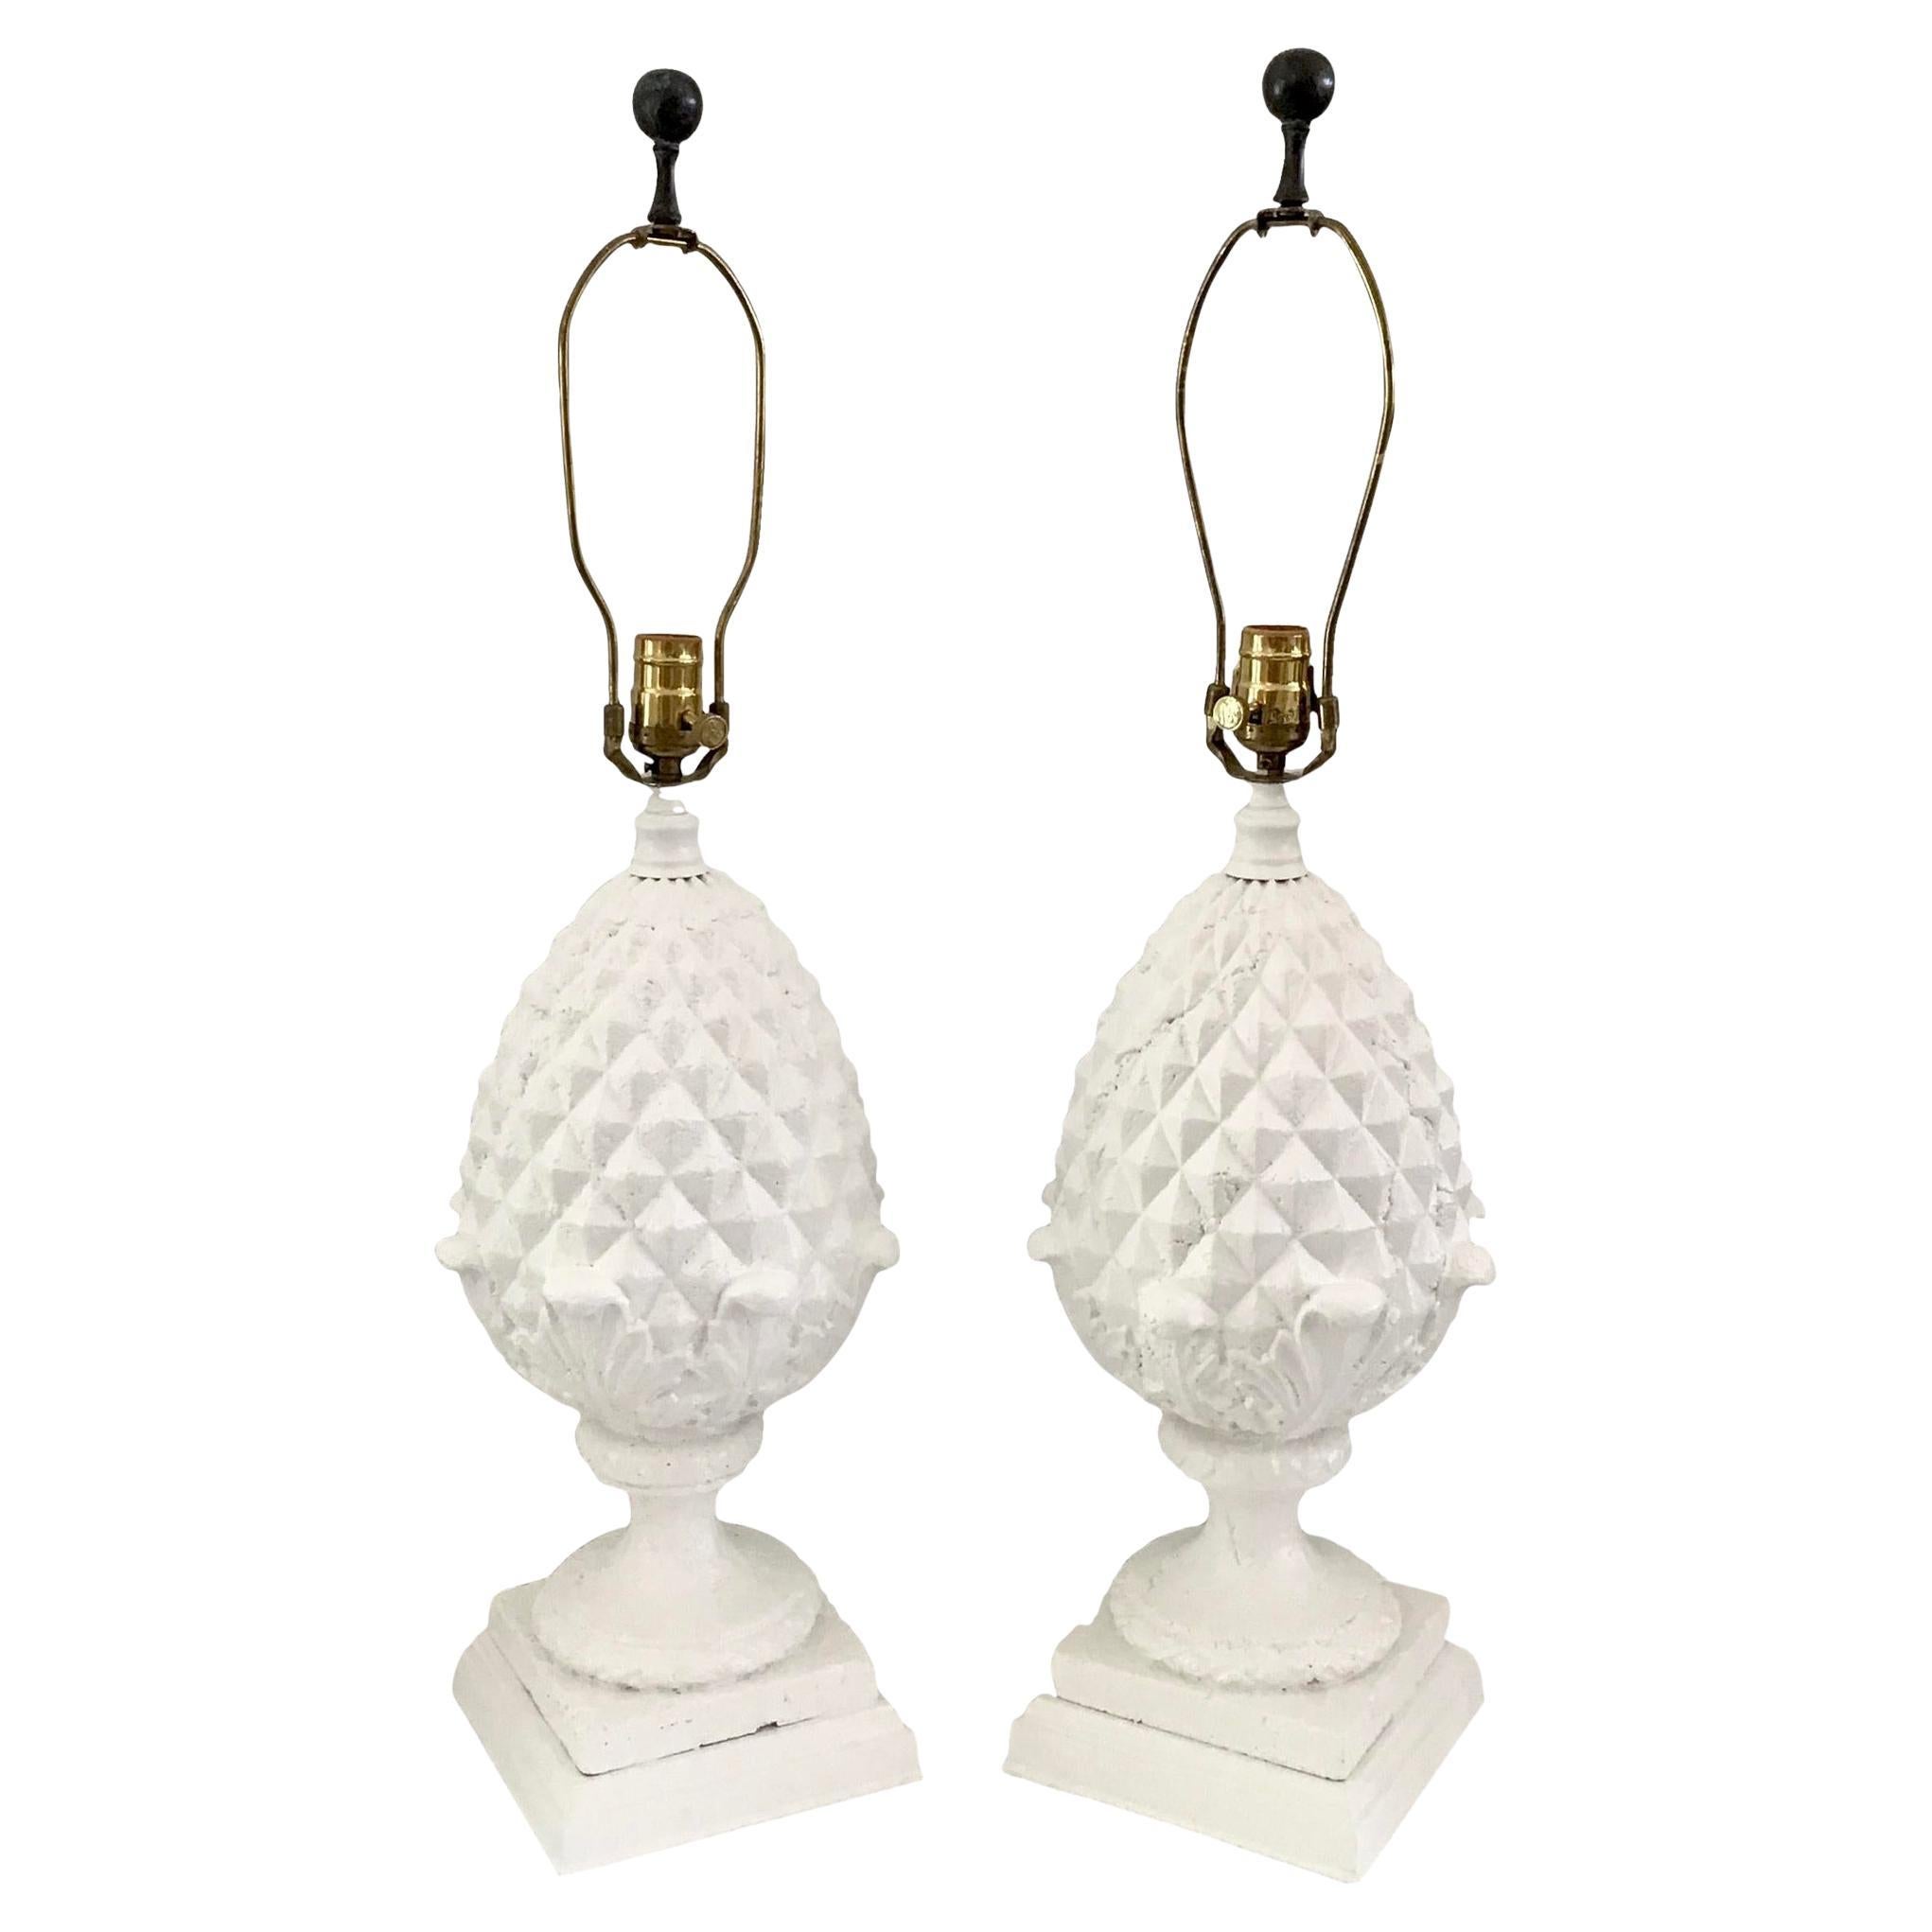 Pineapple Table Lamps in Fresh White Finish, a Pair For Sale